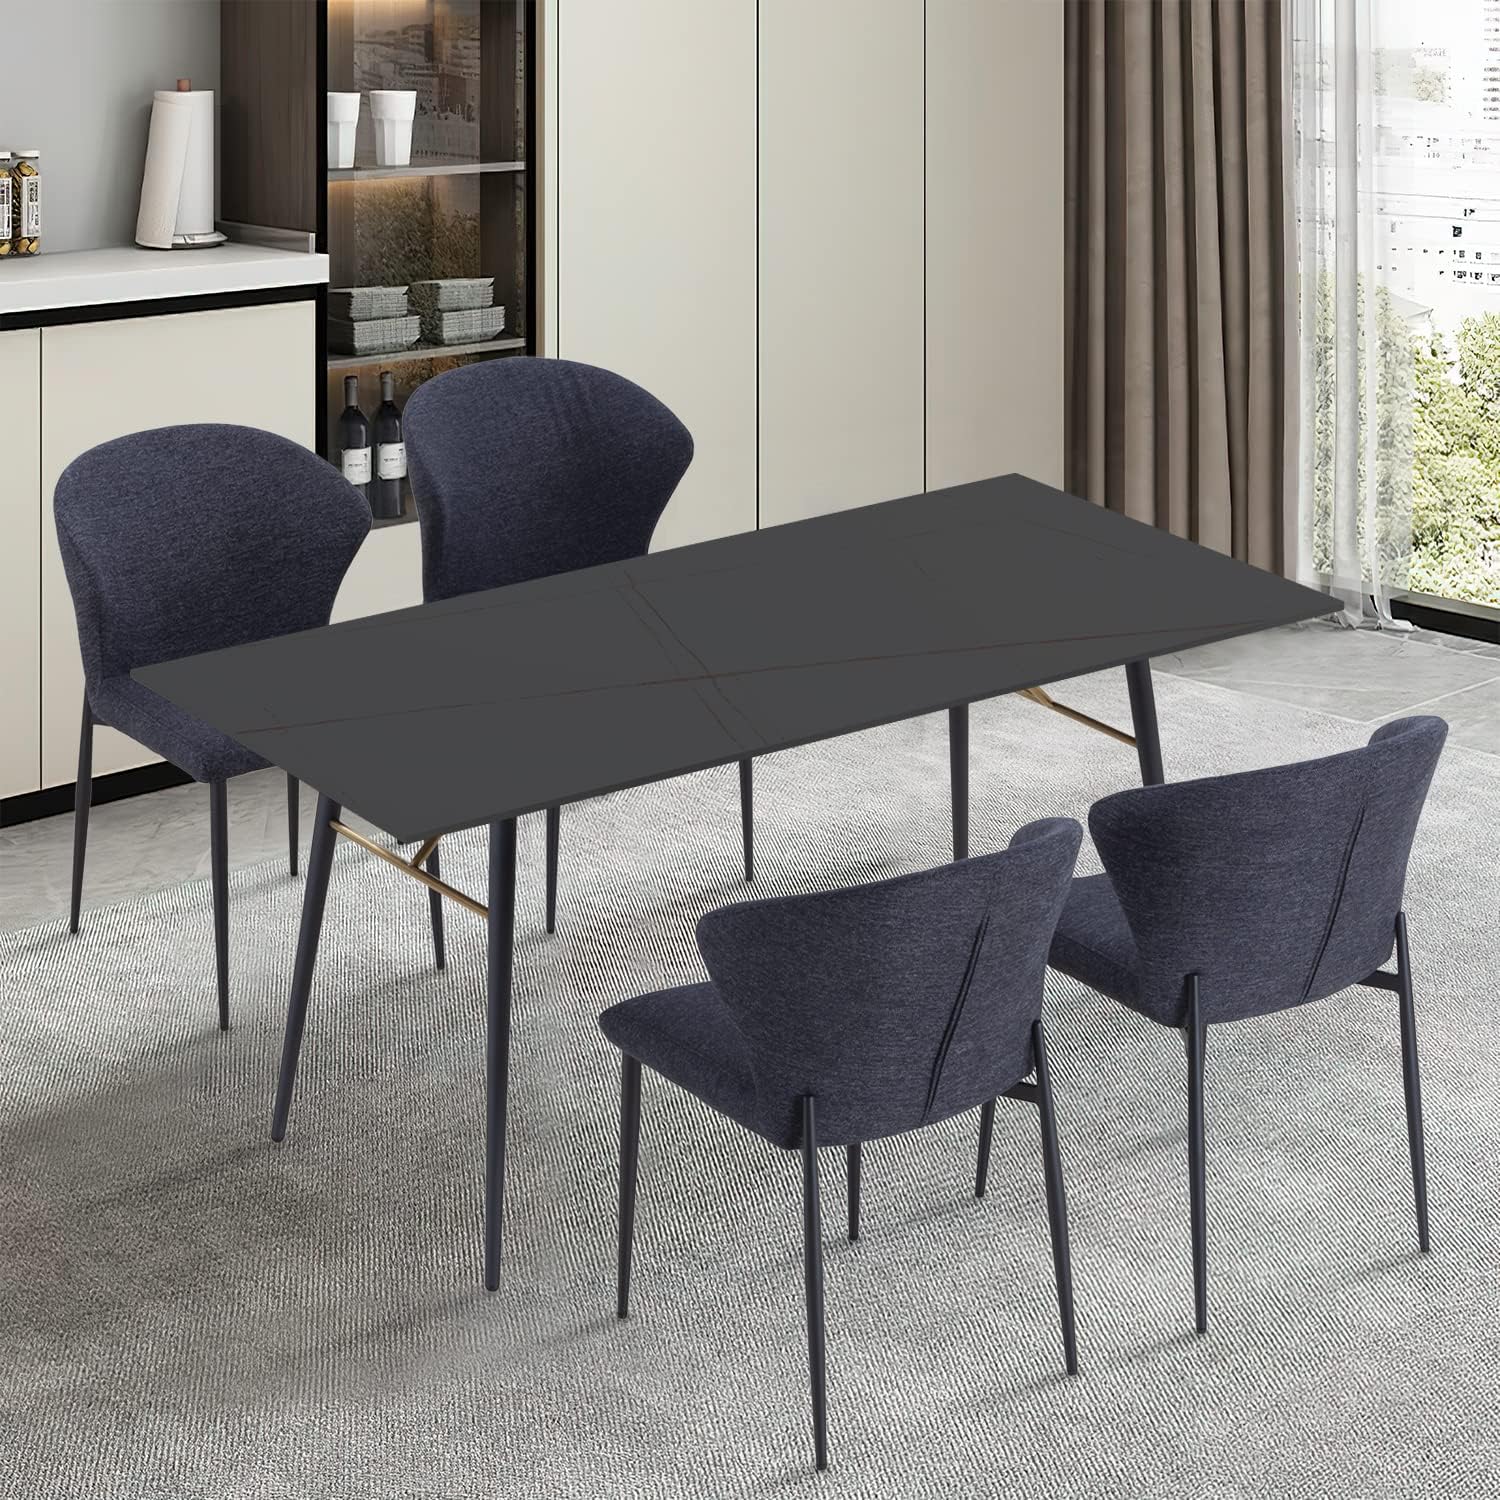 WILLIAMSPACE 62 Dining Table with Sintered Stone Top and Metal Legs, Modern Slate Dining Table for Living Room, Dining Room, Home and Office (Black)